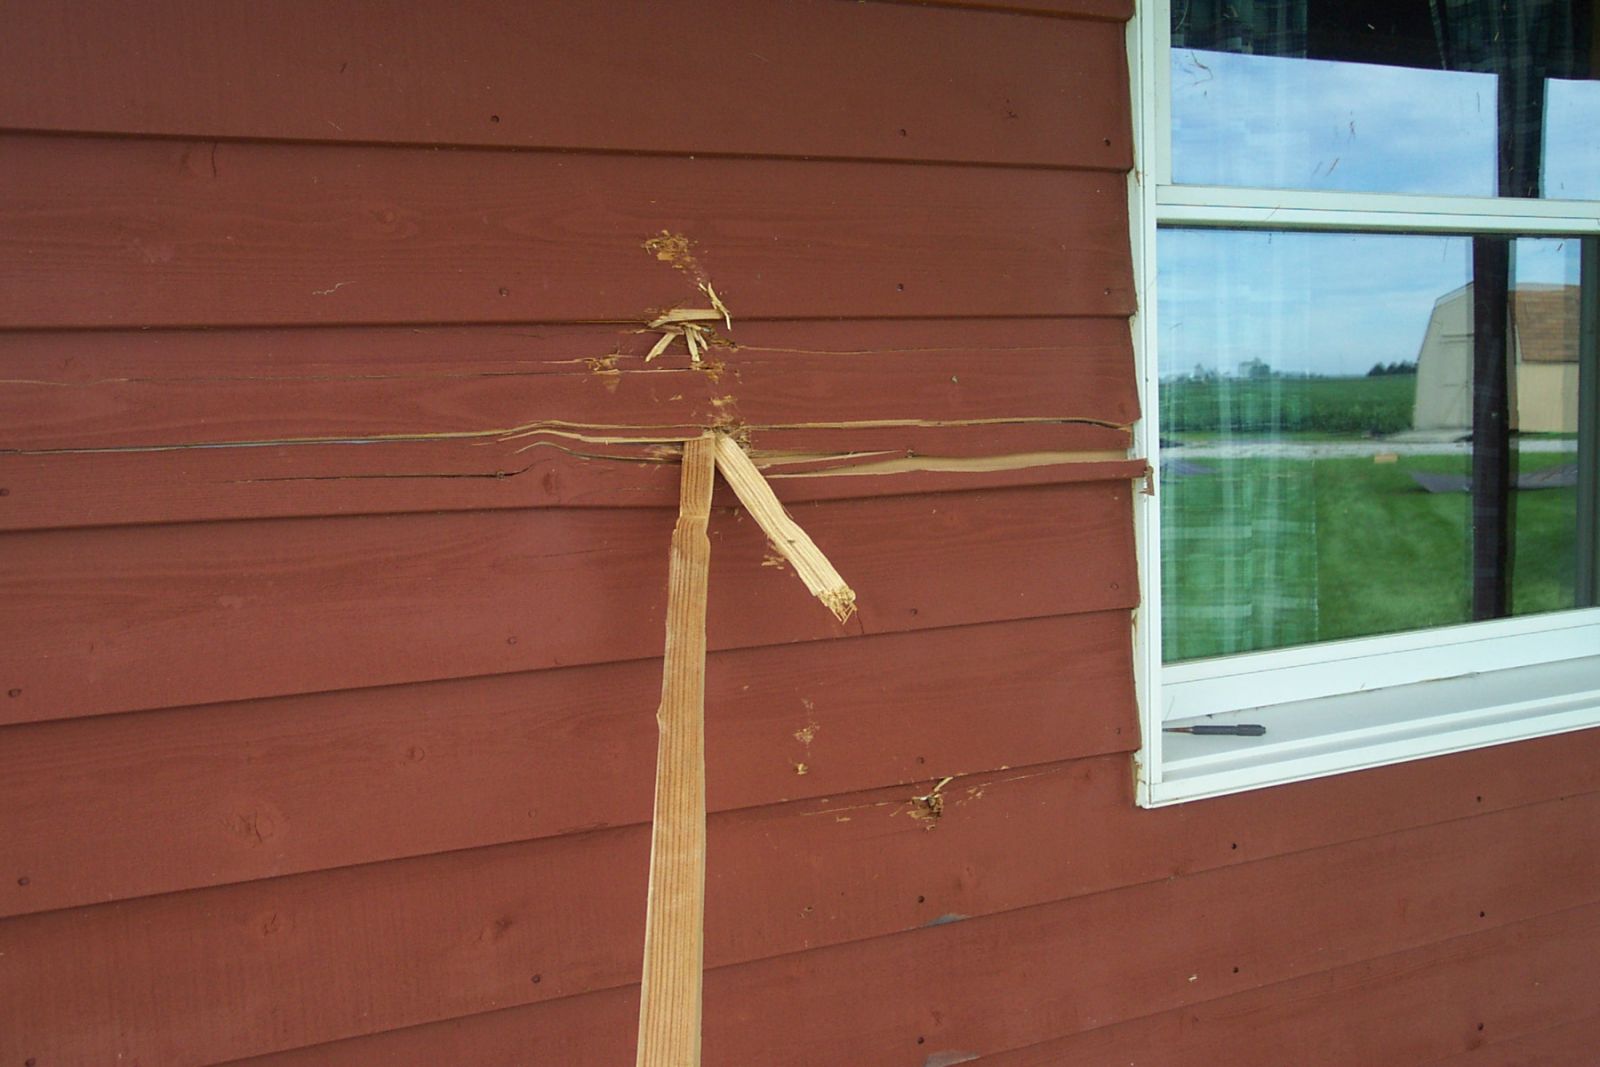 A piece of wood from the barn acted like a projectile and embedded into the wall of this house. Production of small projectiles is a sign of F2 wind speeds.